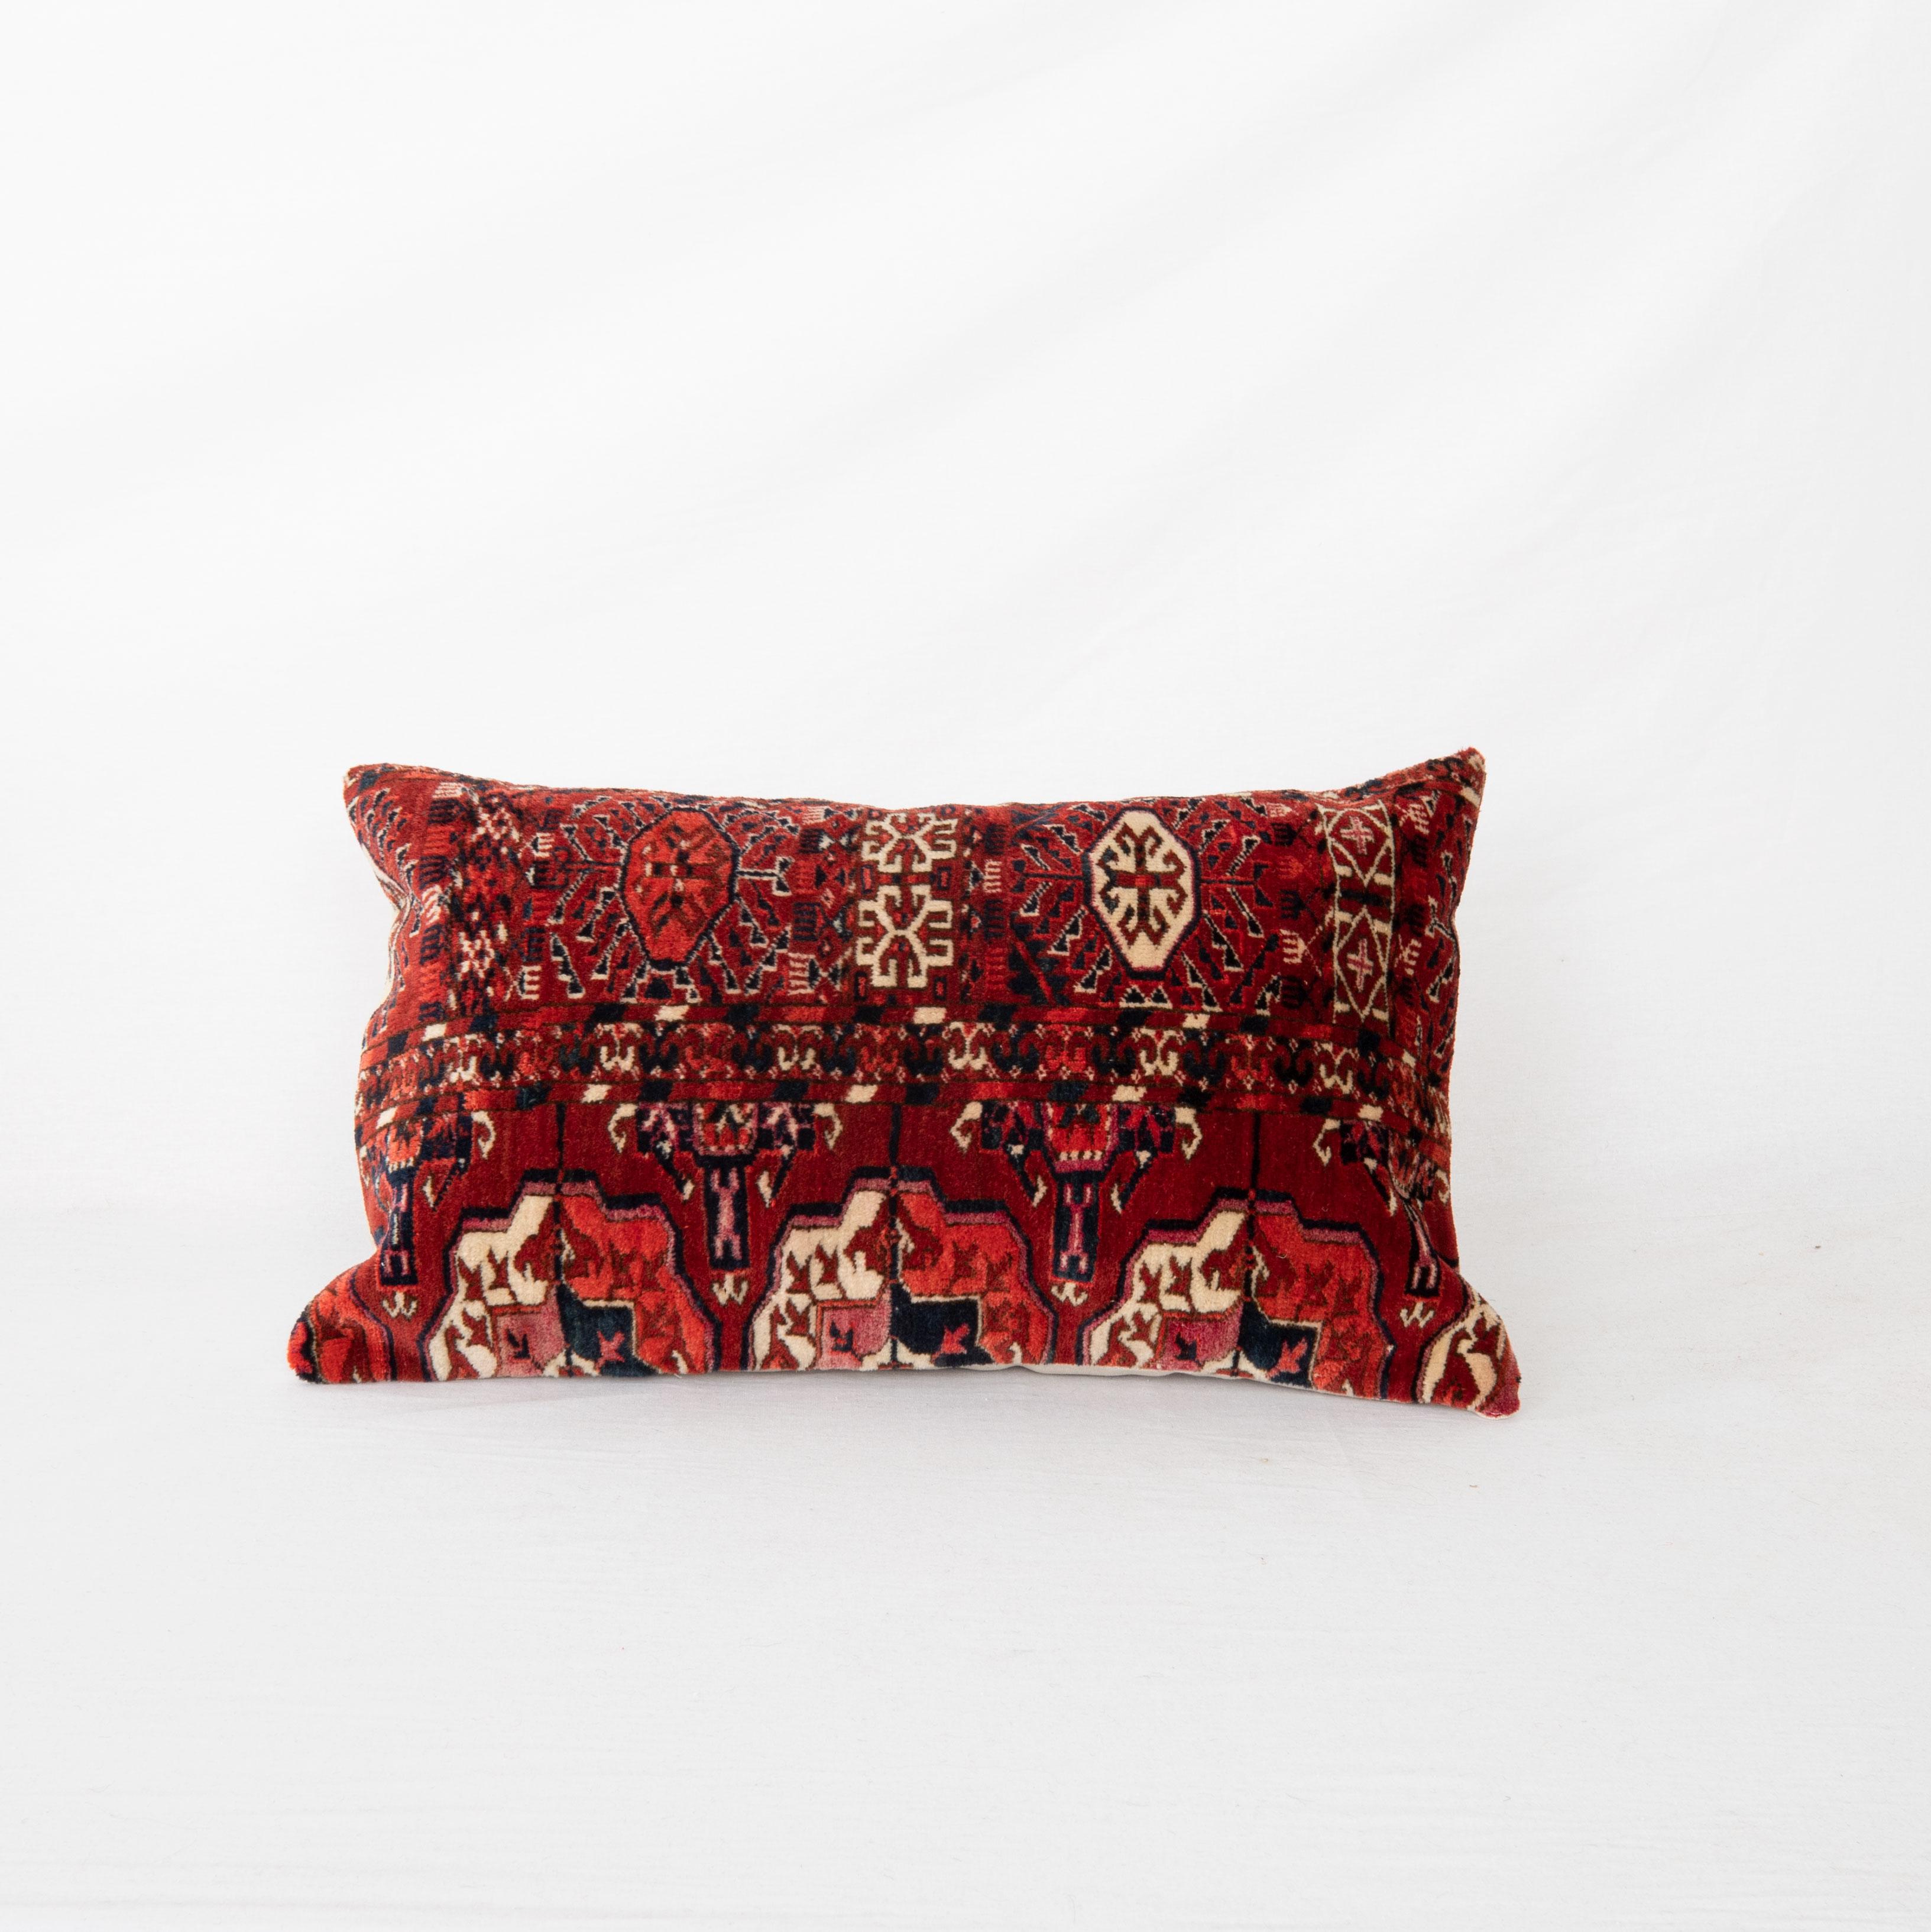 Pillowcase is made from an antique Turkmen, Tekke tribe main rug fragment dating back to 1860s.

It does not come with an insert.
Linen in the back.
Zipper closure.
Dry clean is reccommended.